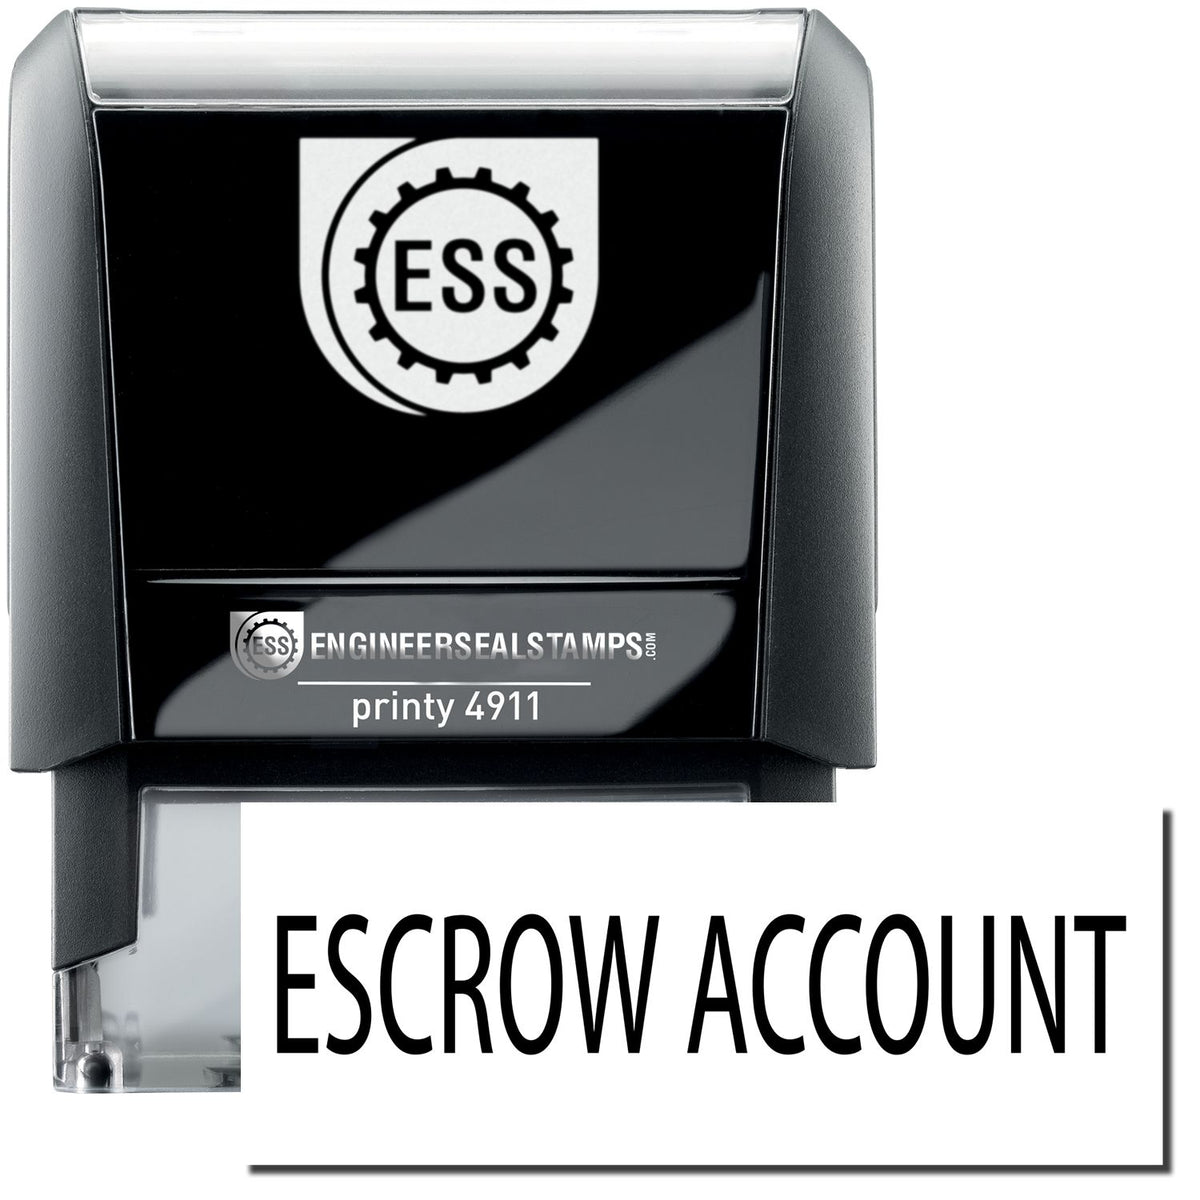 A self-inking stamp with a stamped image showing how the text &quot;ESCROW ACCOUNT&quot; is displayed after stamping.